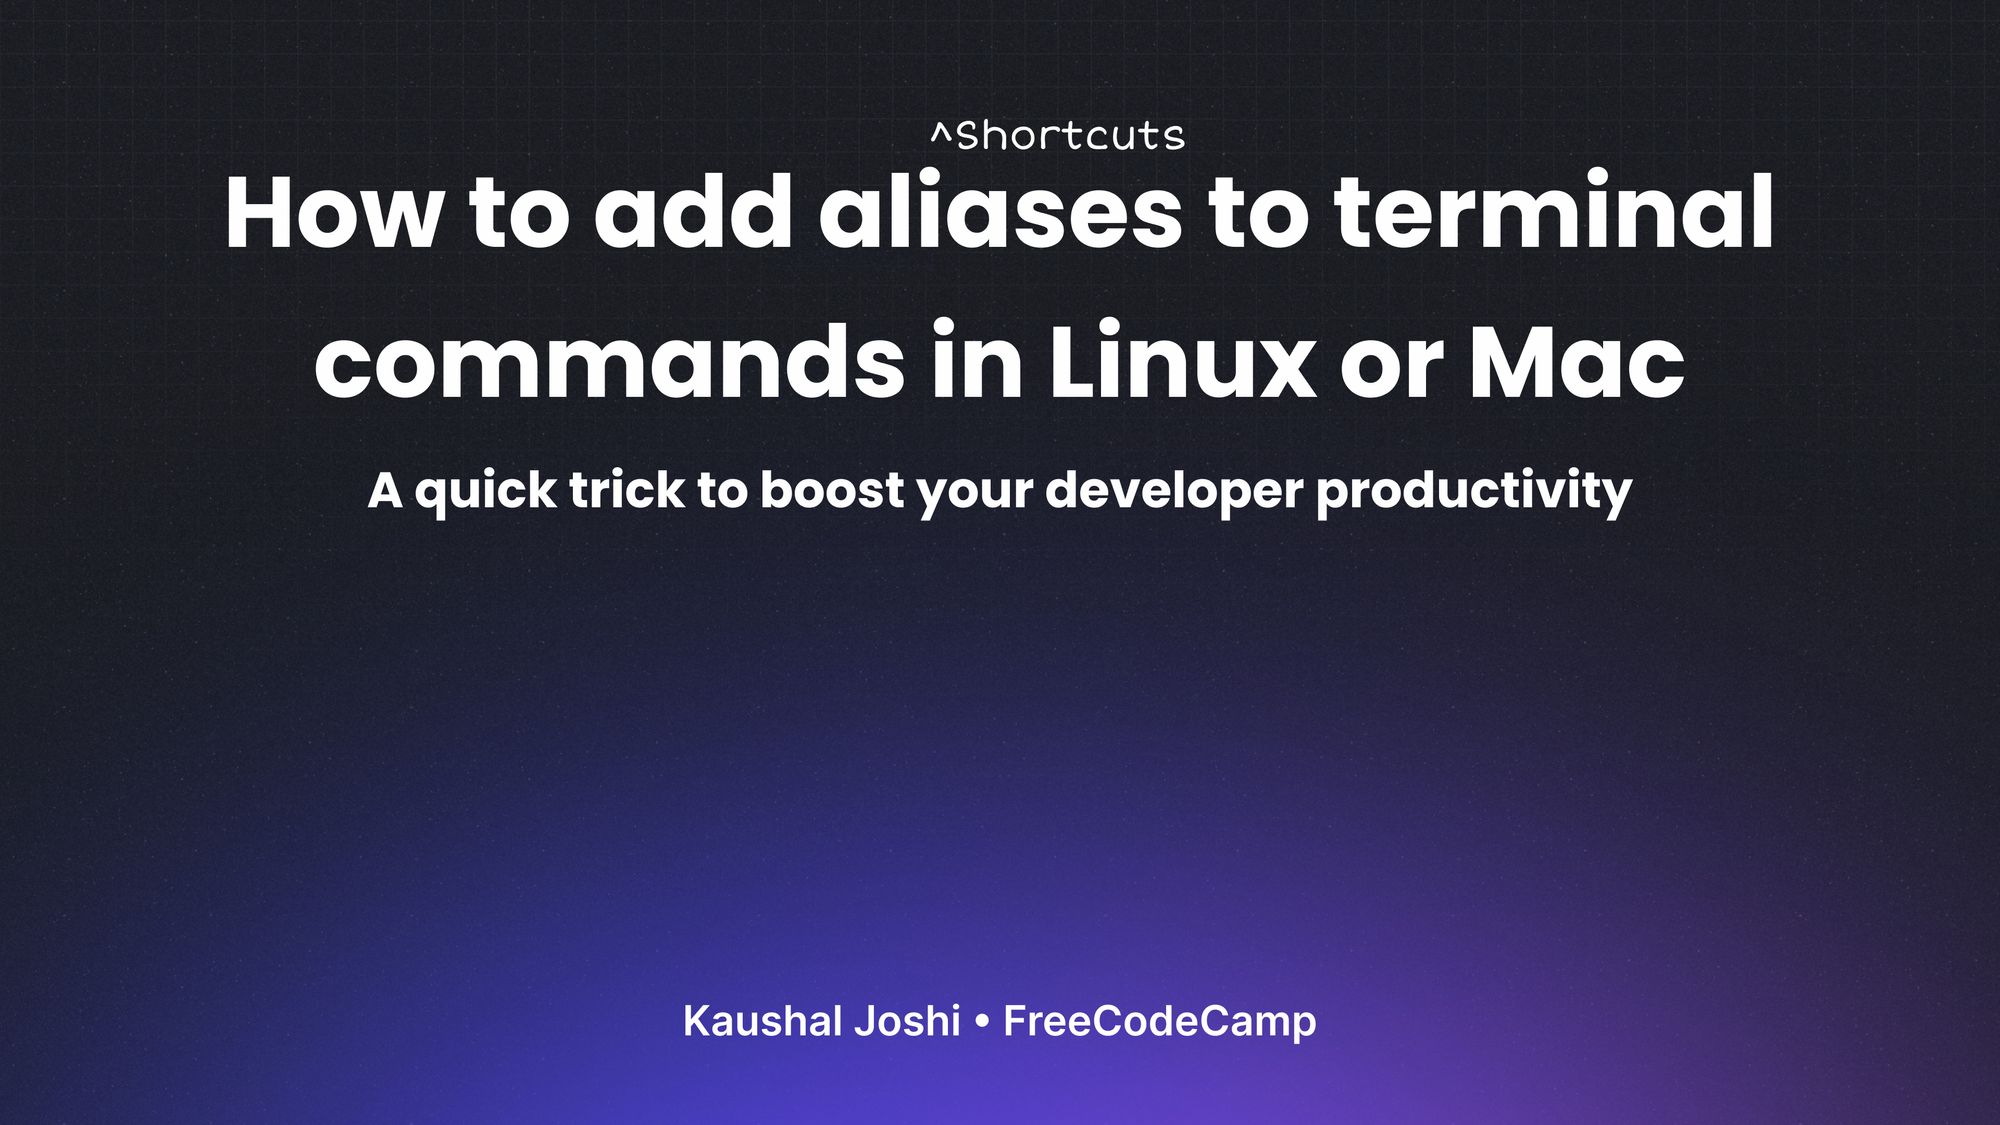 How to Add Aliases to Terminal Commands in Linux and Mac